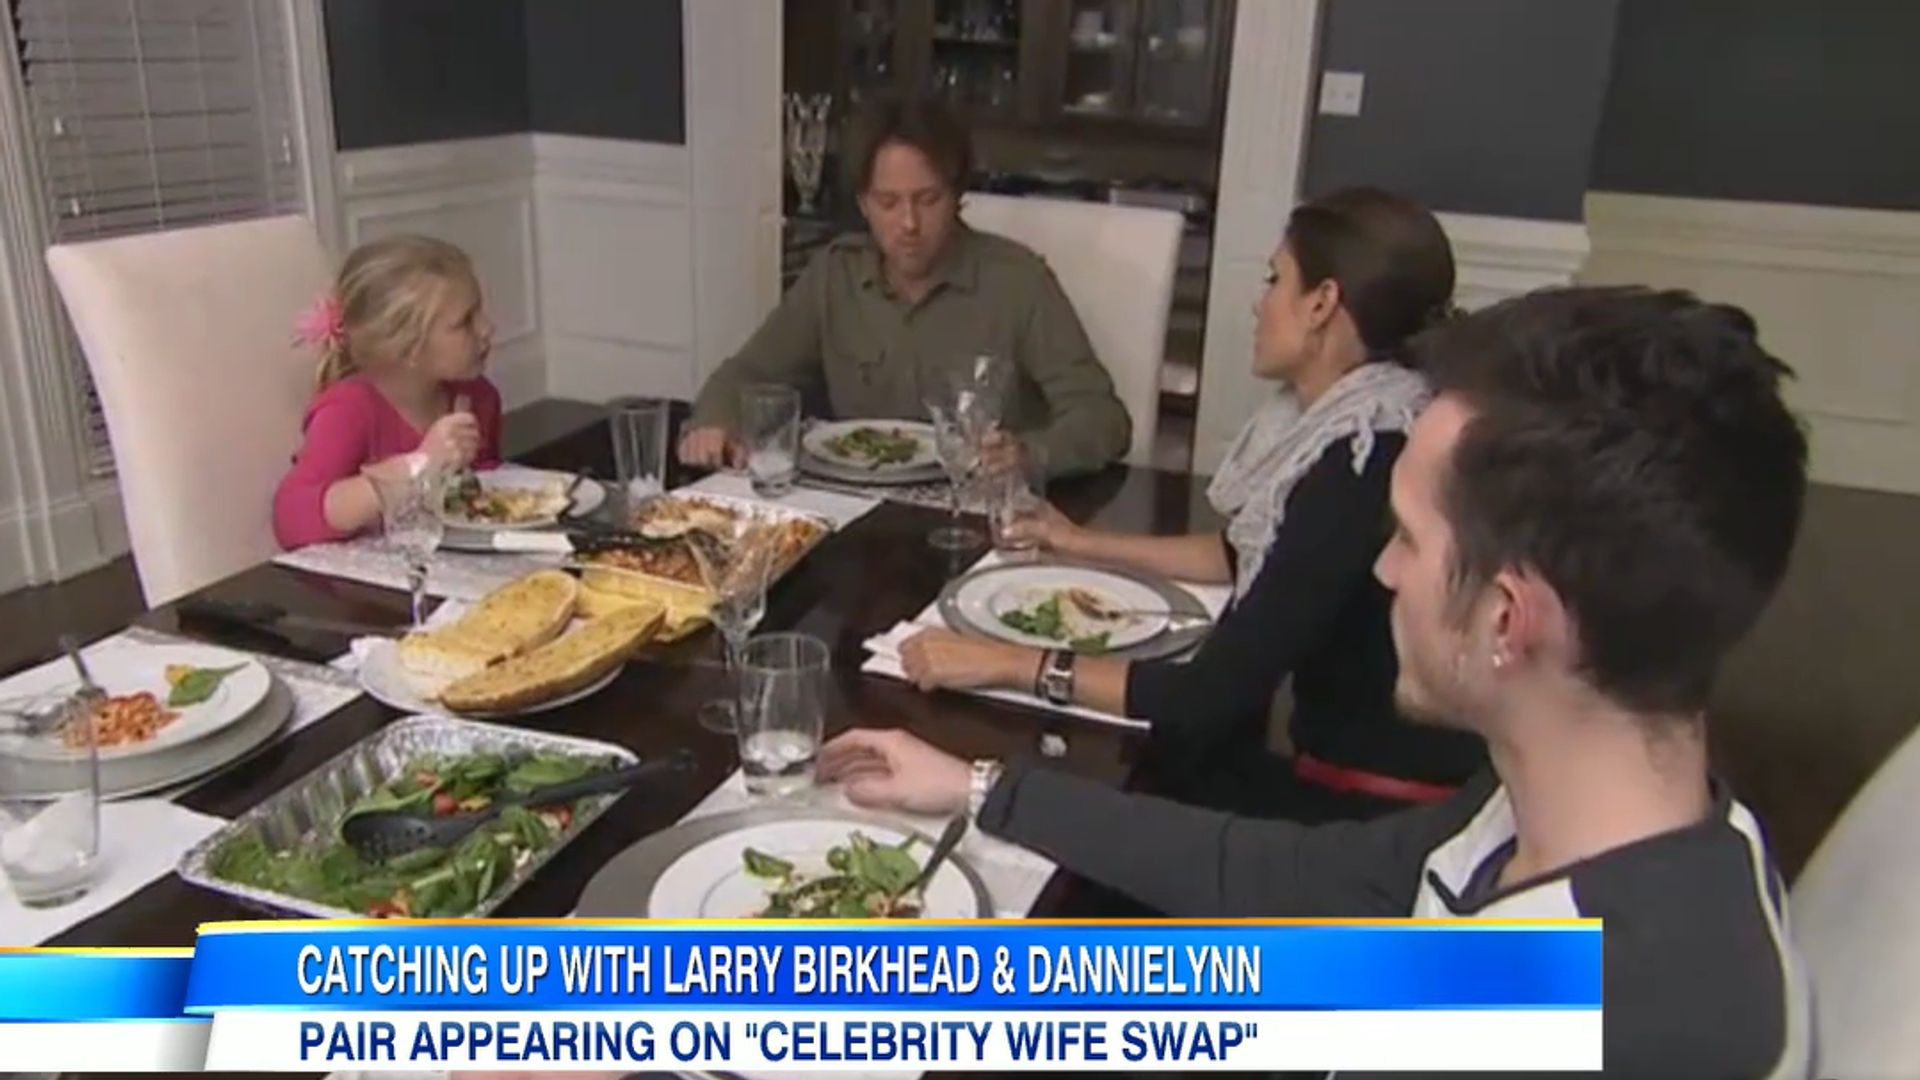 The family's dining room where Larry and Dannielynn are sat at the table